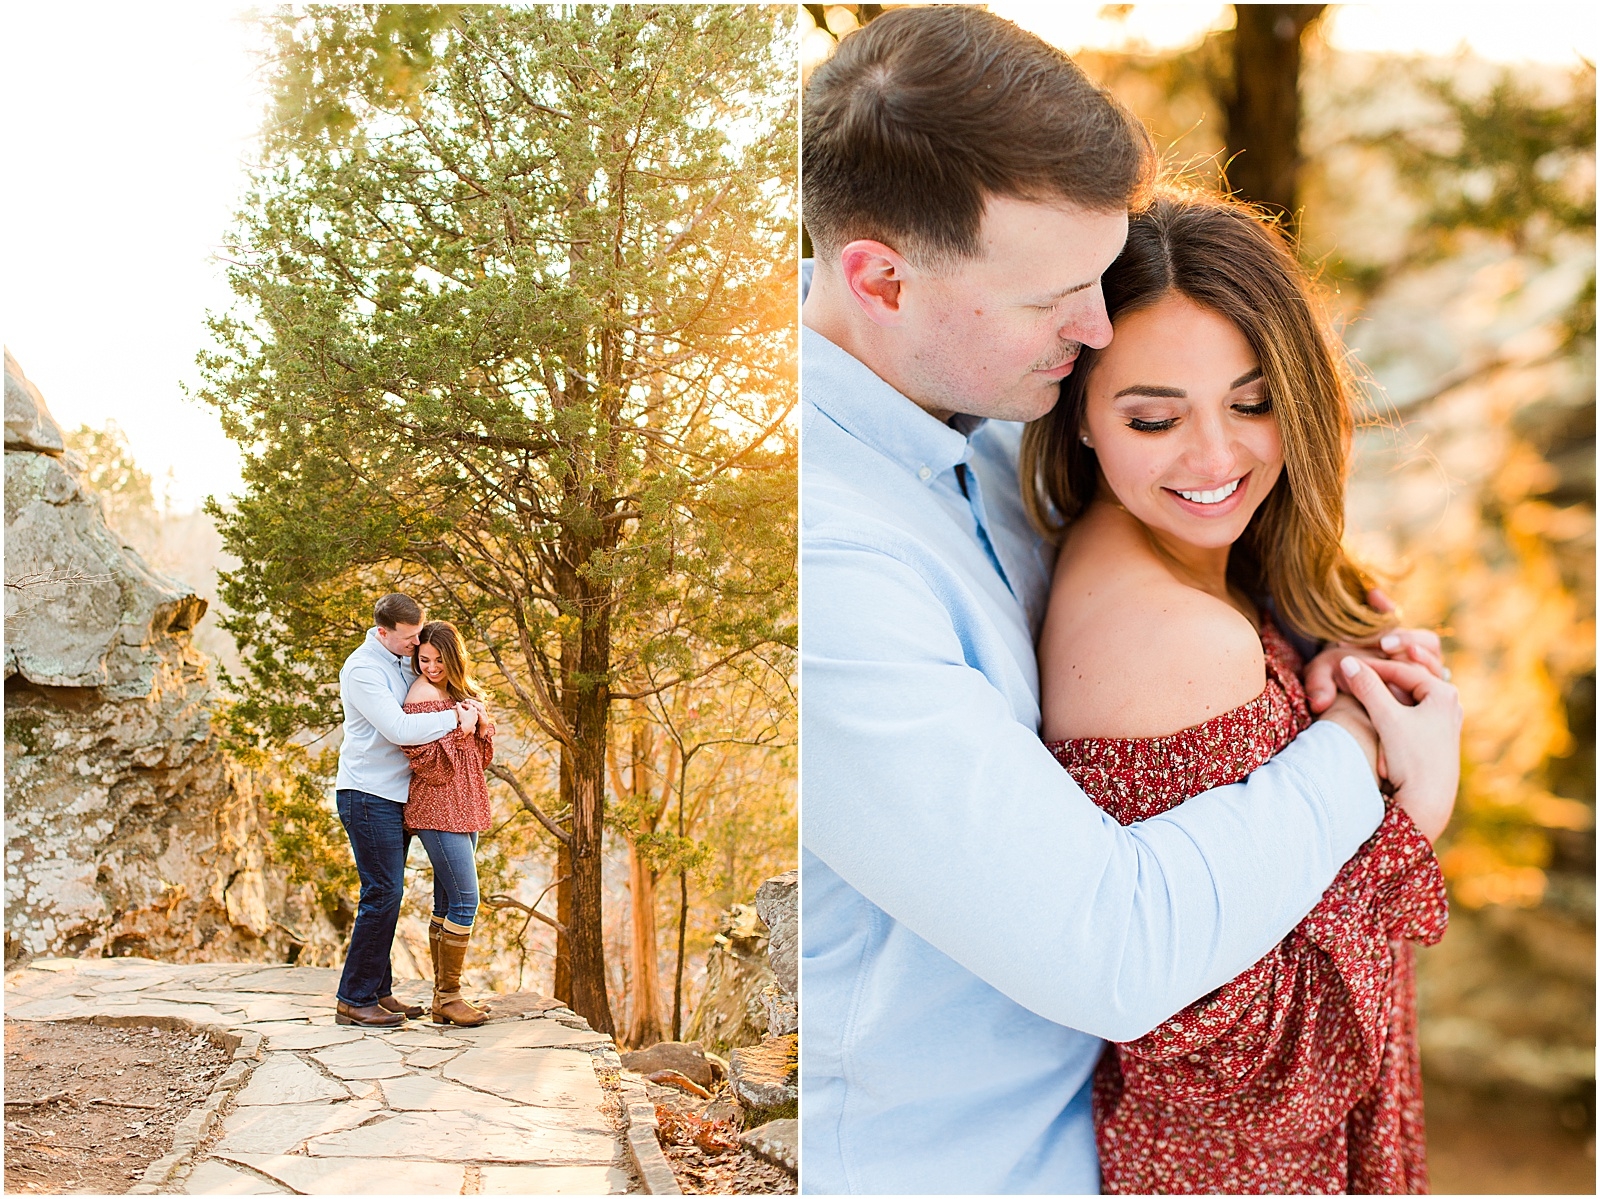 A Sunny Garden of the Gods Engagement Session | Shiloh and Lee | Bret and Brandie Photography077.jpg